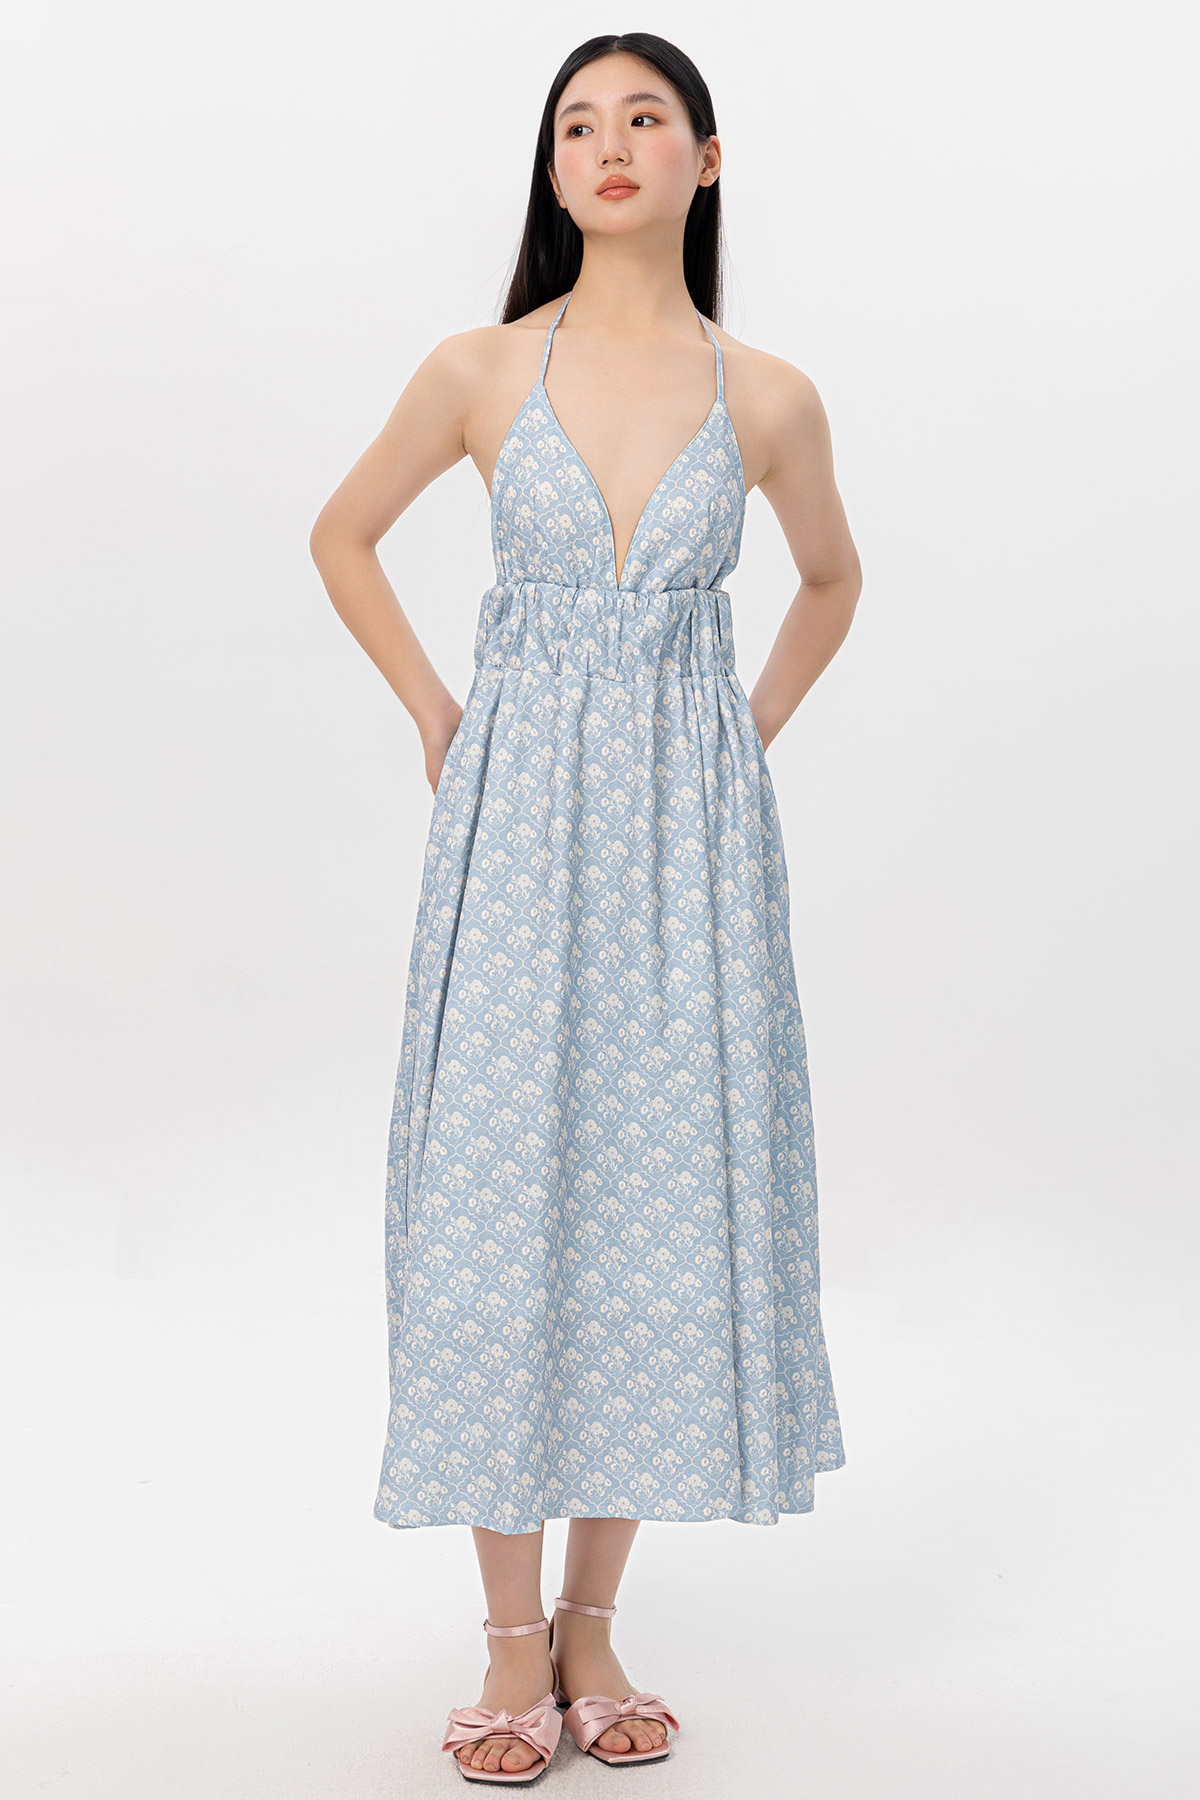 BAUME PADDED DRESS - SPRING BREEZE [BY MODPARADE]